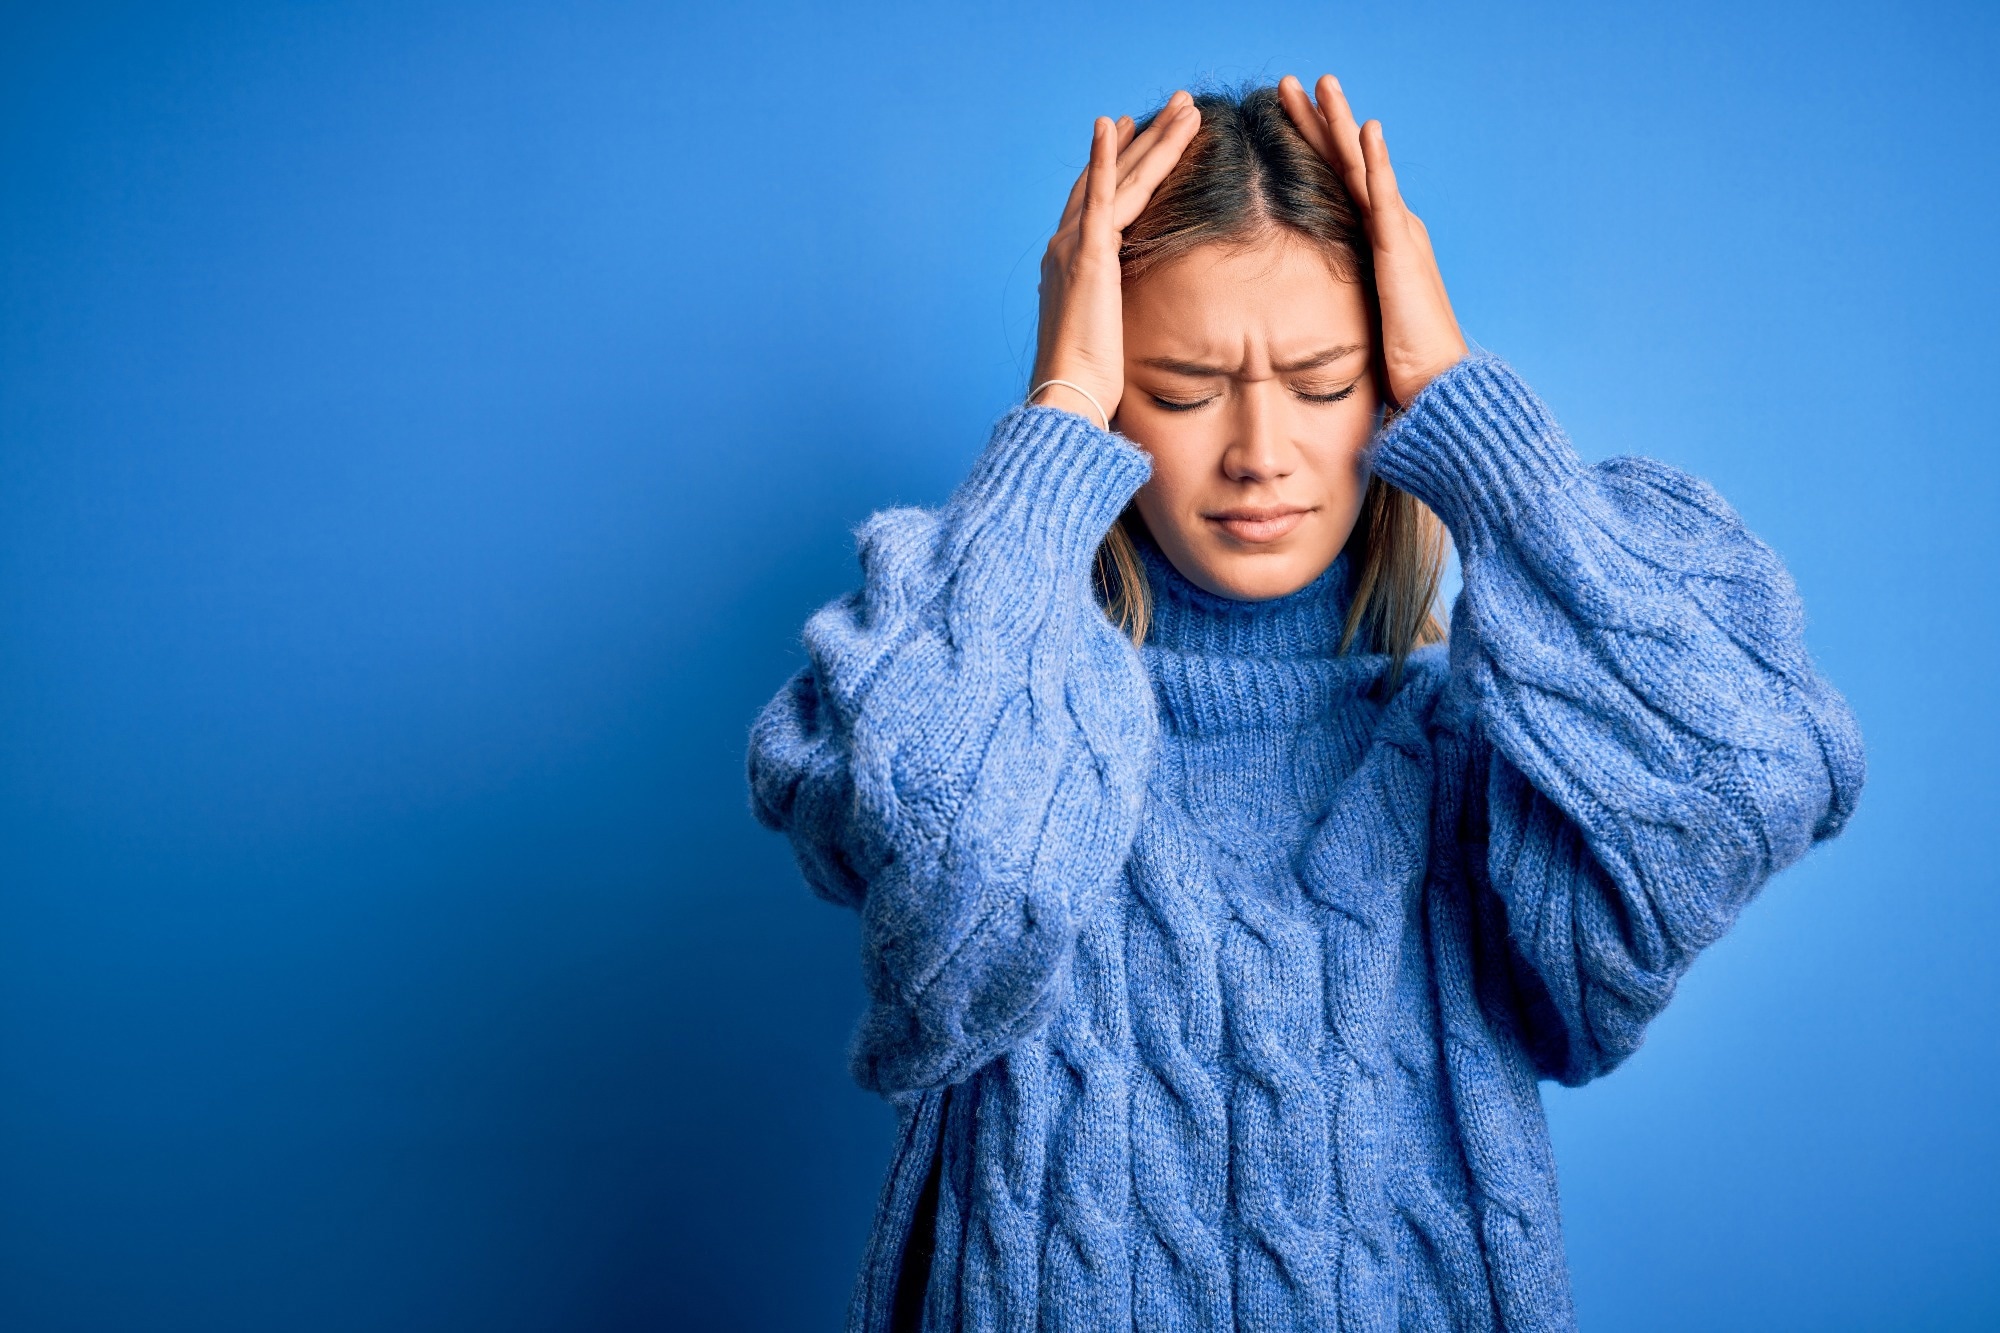 Review: CGRP Antagonism and Ketogenic Diet in the Treatment of Migraine. Image Credit: Krakenimages.com / Shutterstock